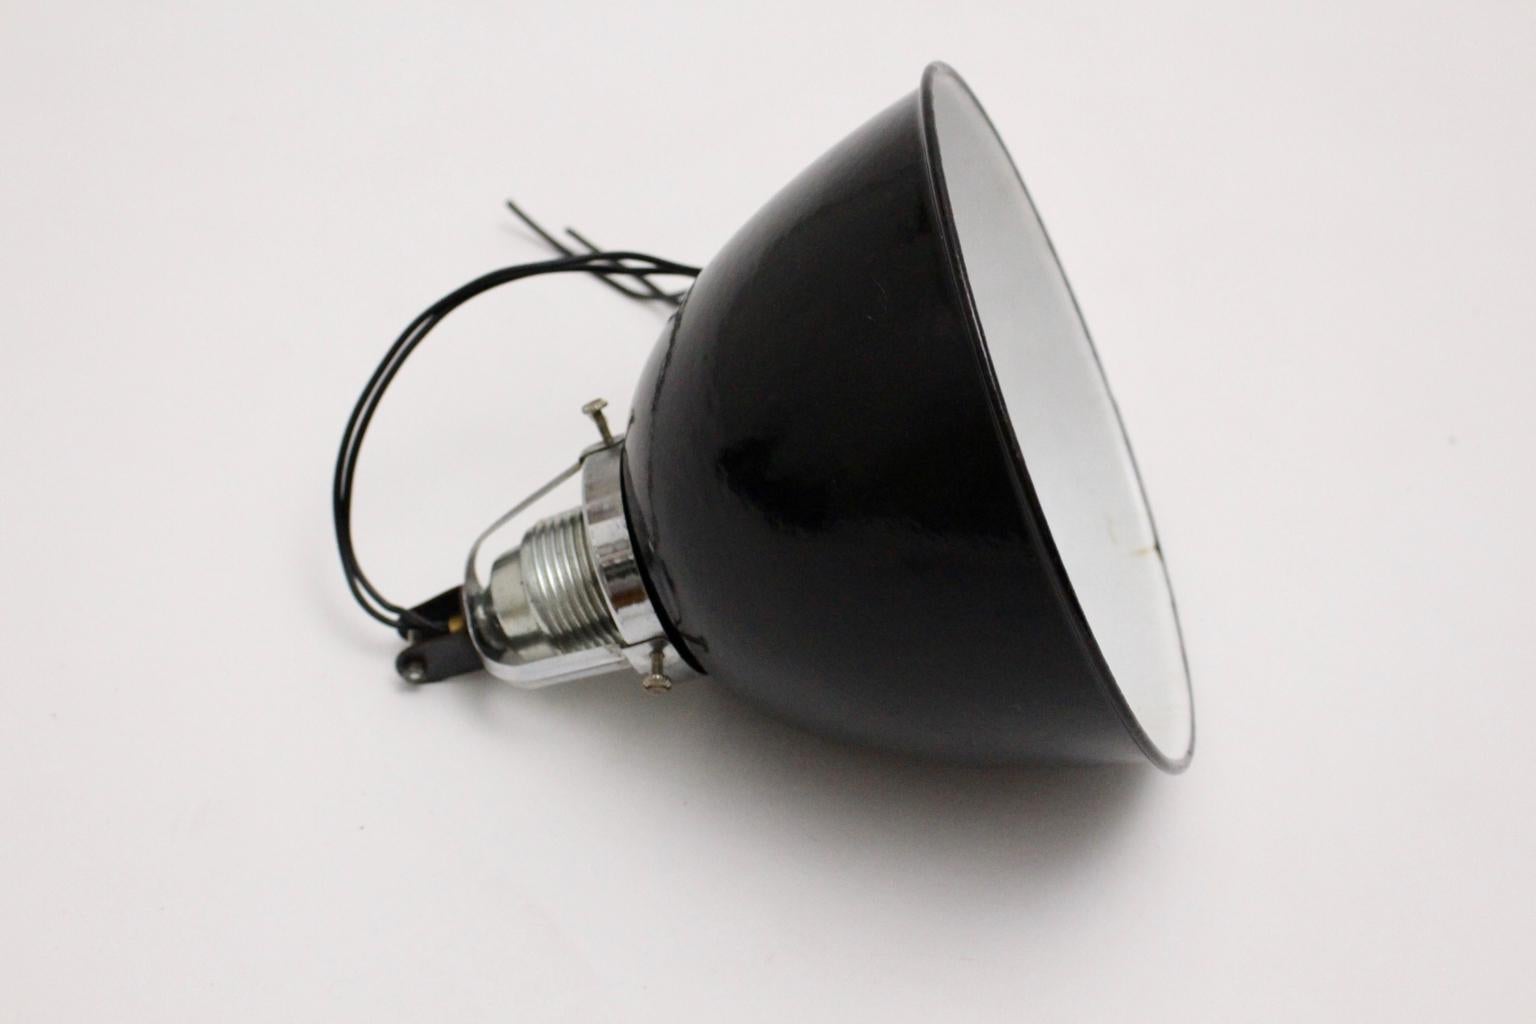 Metal Bauhaus Vintage Black and White Email Hanging Lamp, 1920s, Germany For Sale